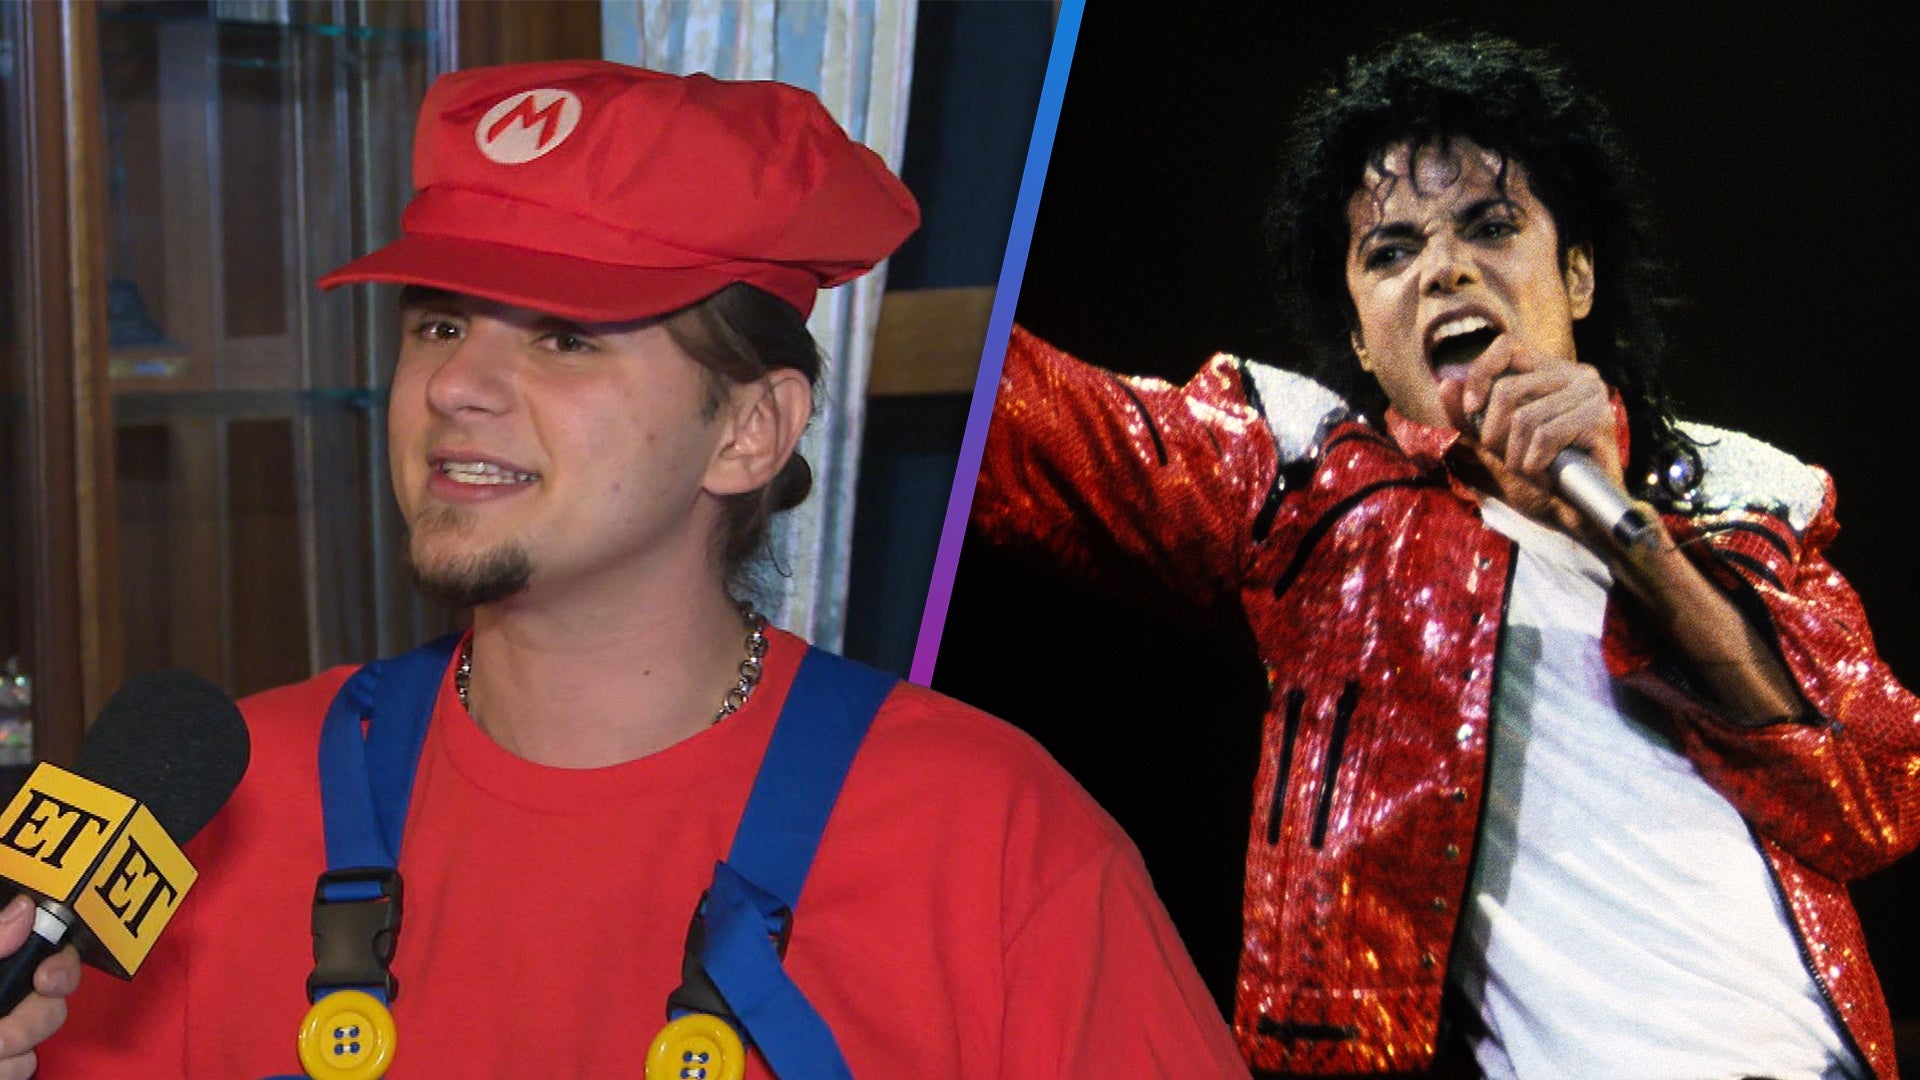 Prince Jackson on King of Pop Controversy and 'Thriller's Legacy (Exclusive)